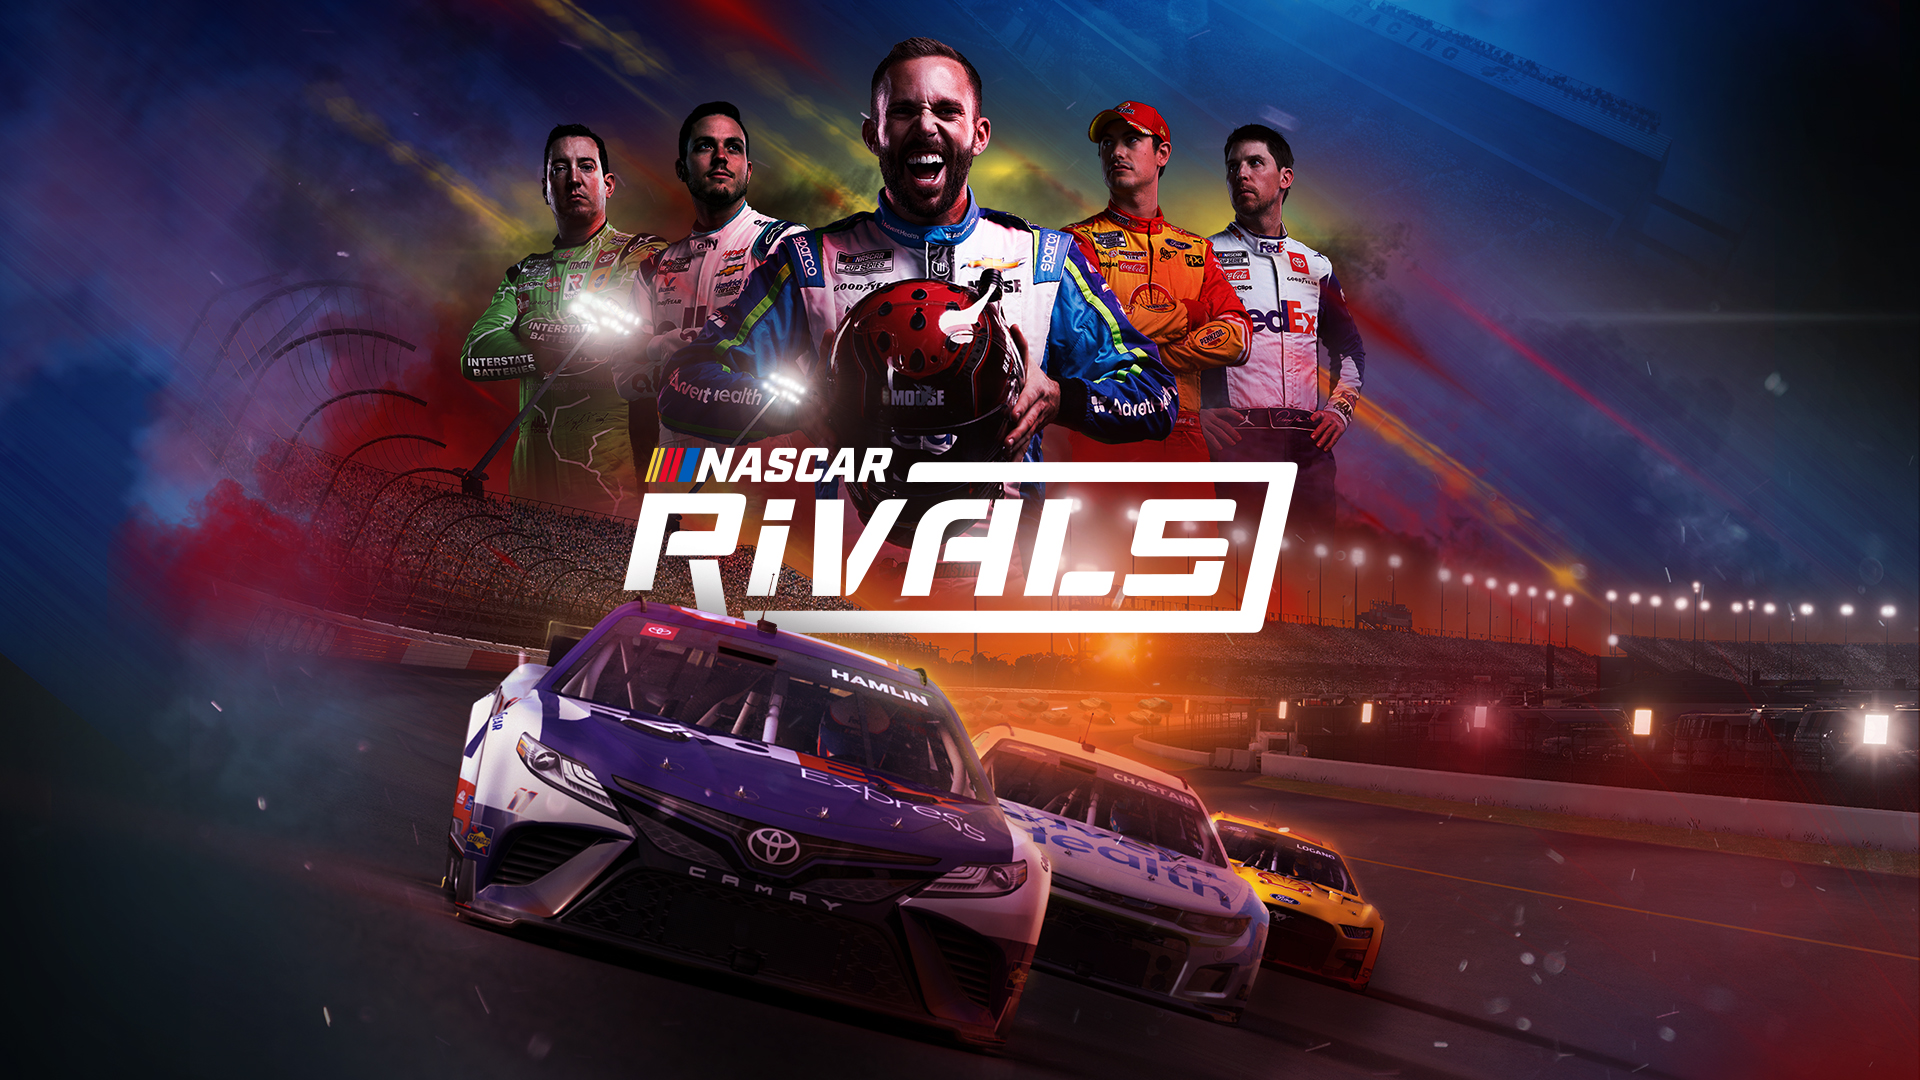 NASCAR RIVALS IS AVAILABLE TODAY - THE OFFICIALLY LICENSED VIDEO GAME OF THE 2022 NASCAR SEASON FROM MOTORSPORT GAMES